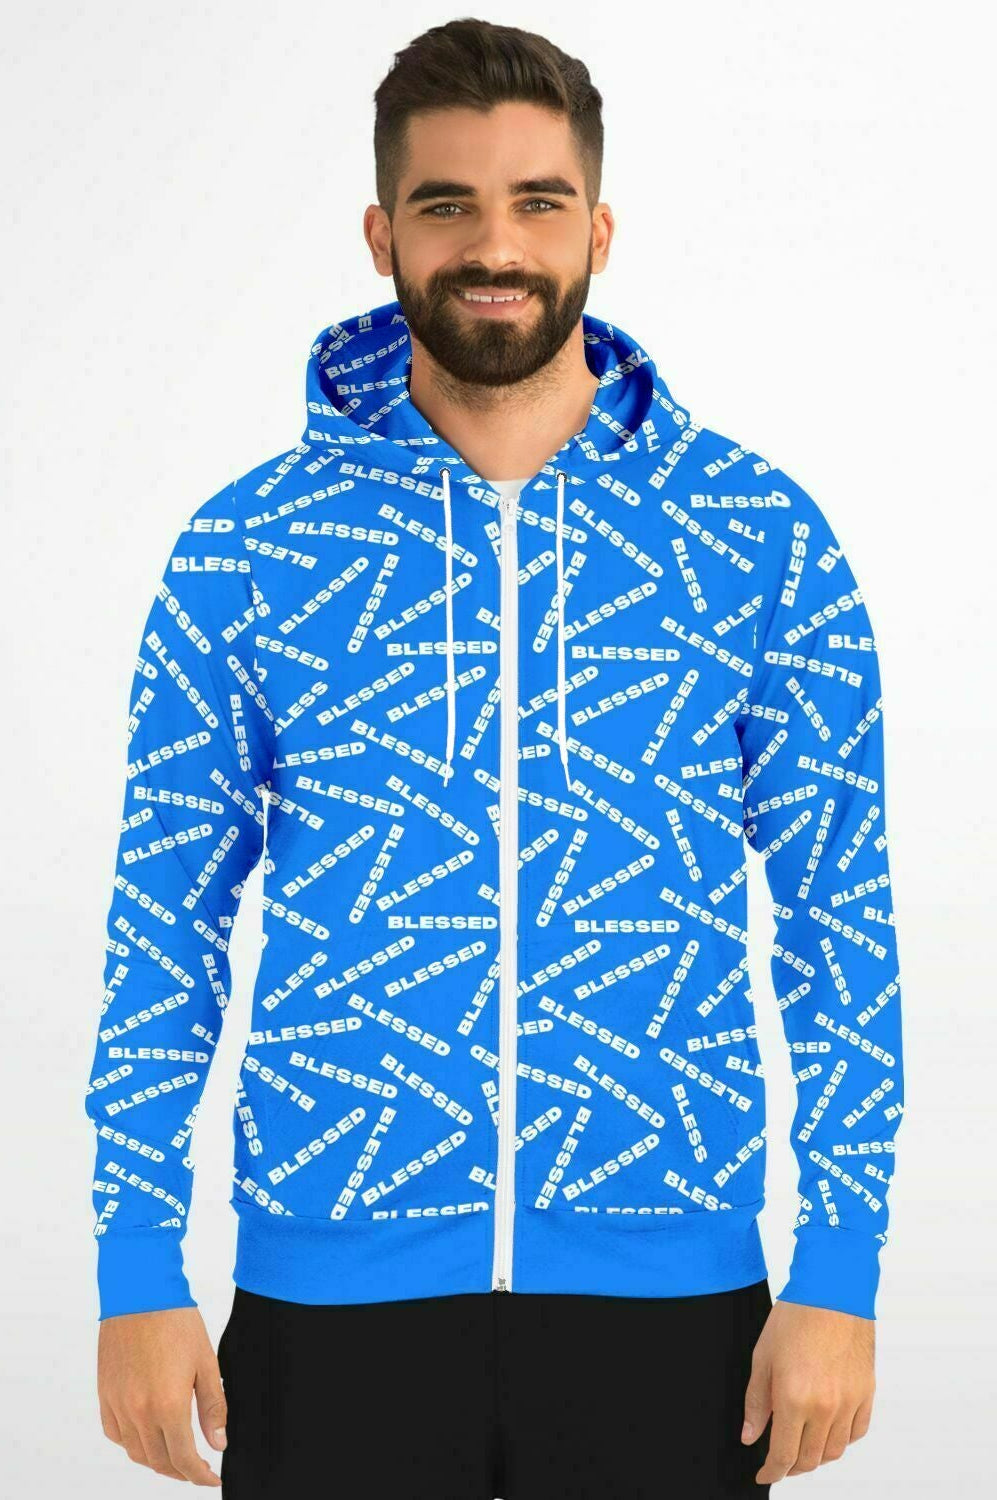 BLESSED Blue Fashion Zip-Up Hoodie Get Blessed Now